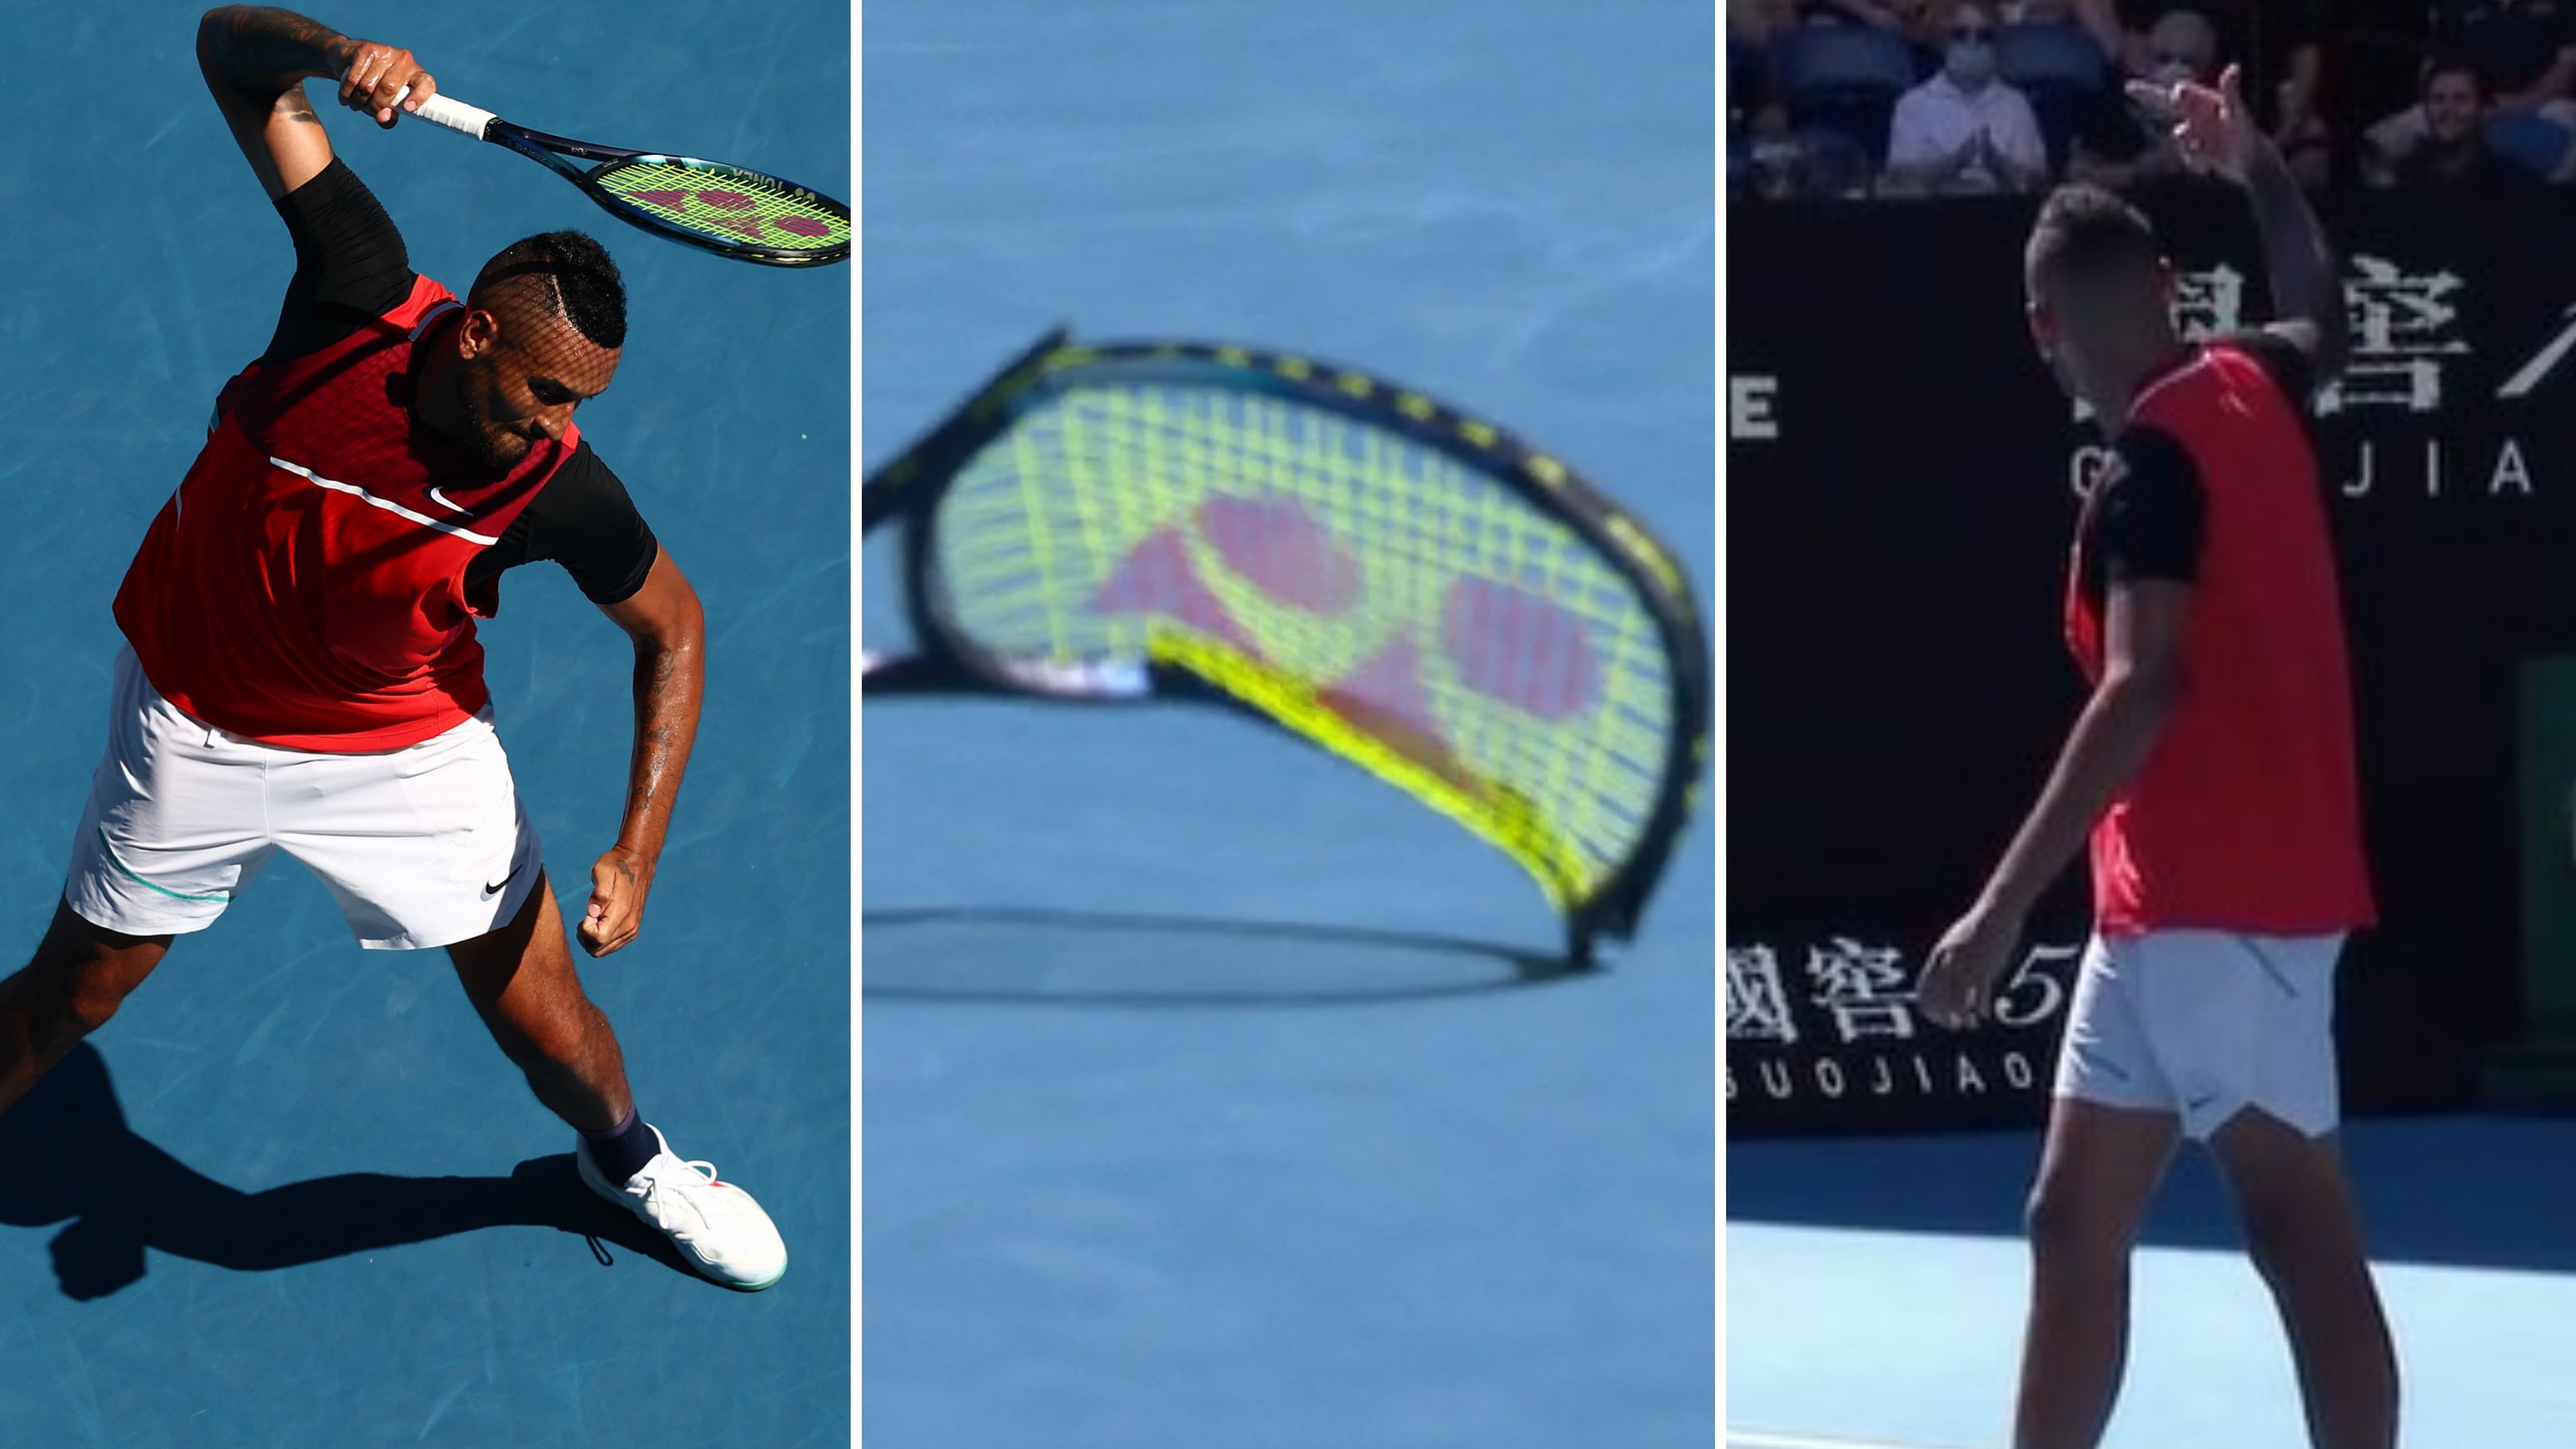 Nick Kyrgios melted down during his doubles win, smashing a racquet and flipping off the crowd.